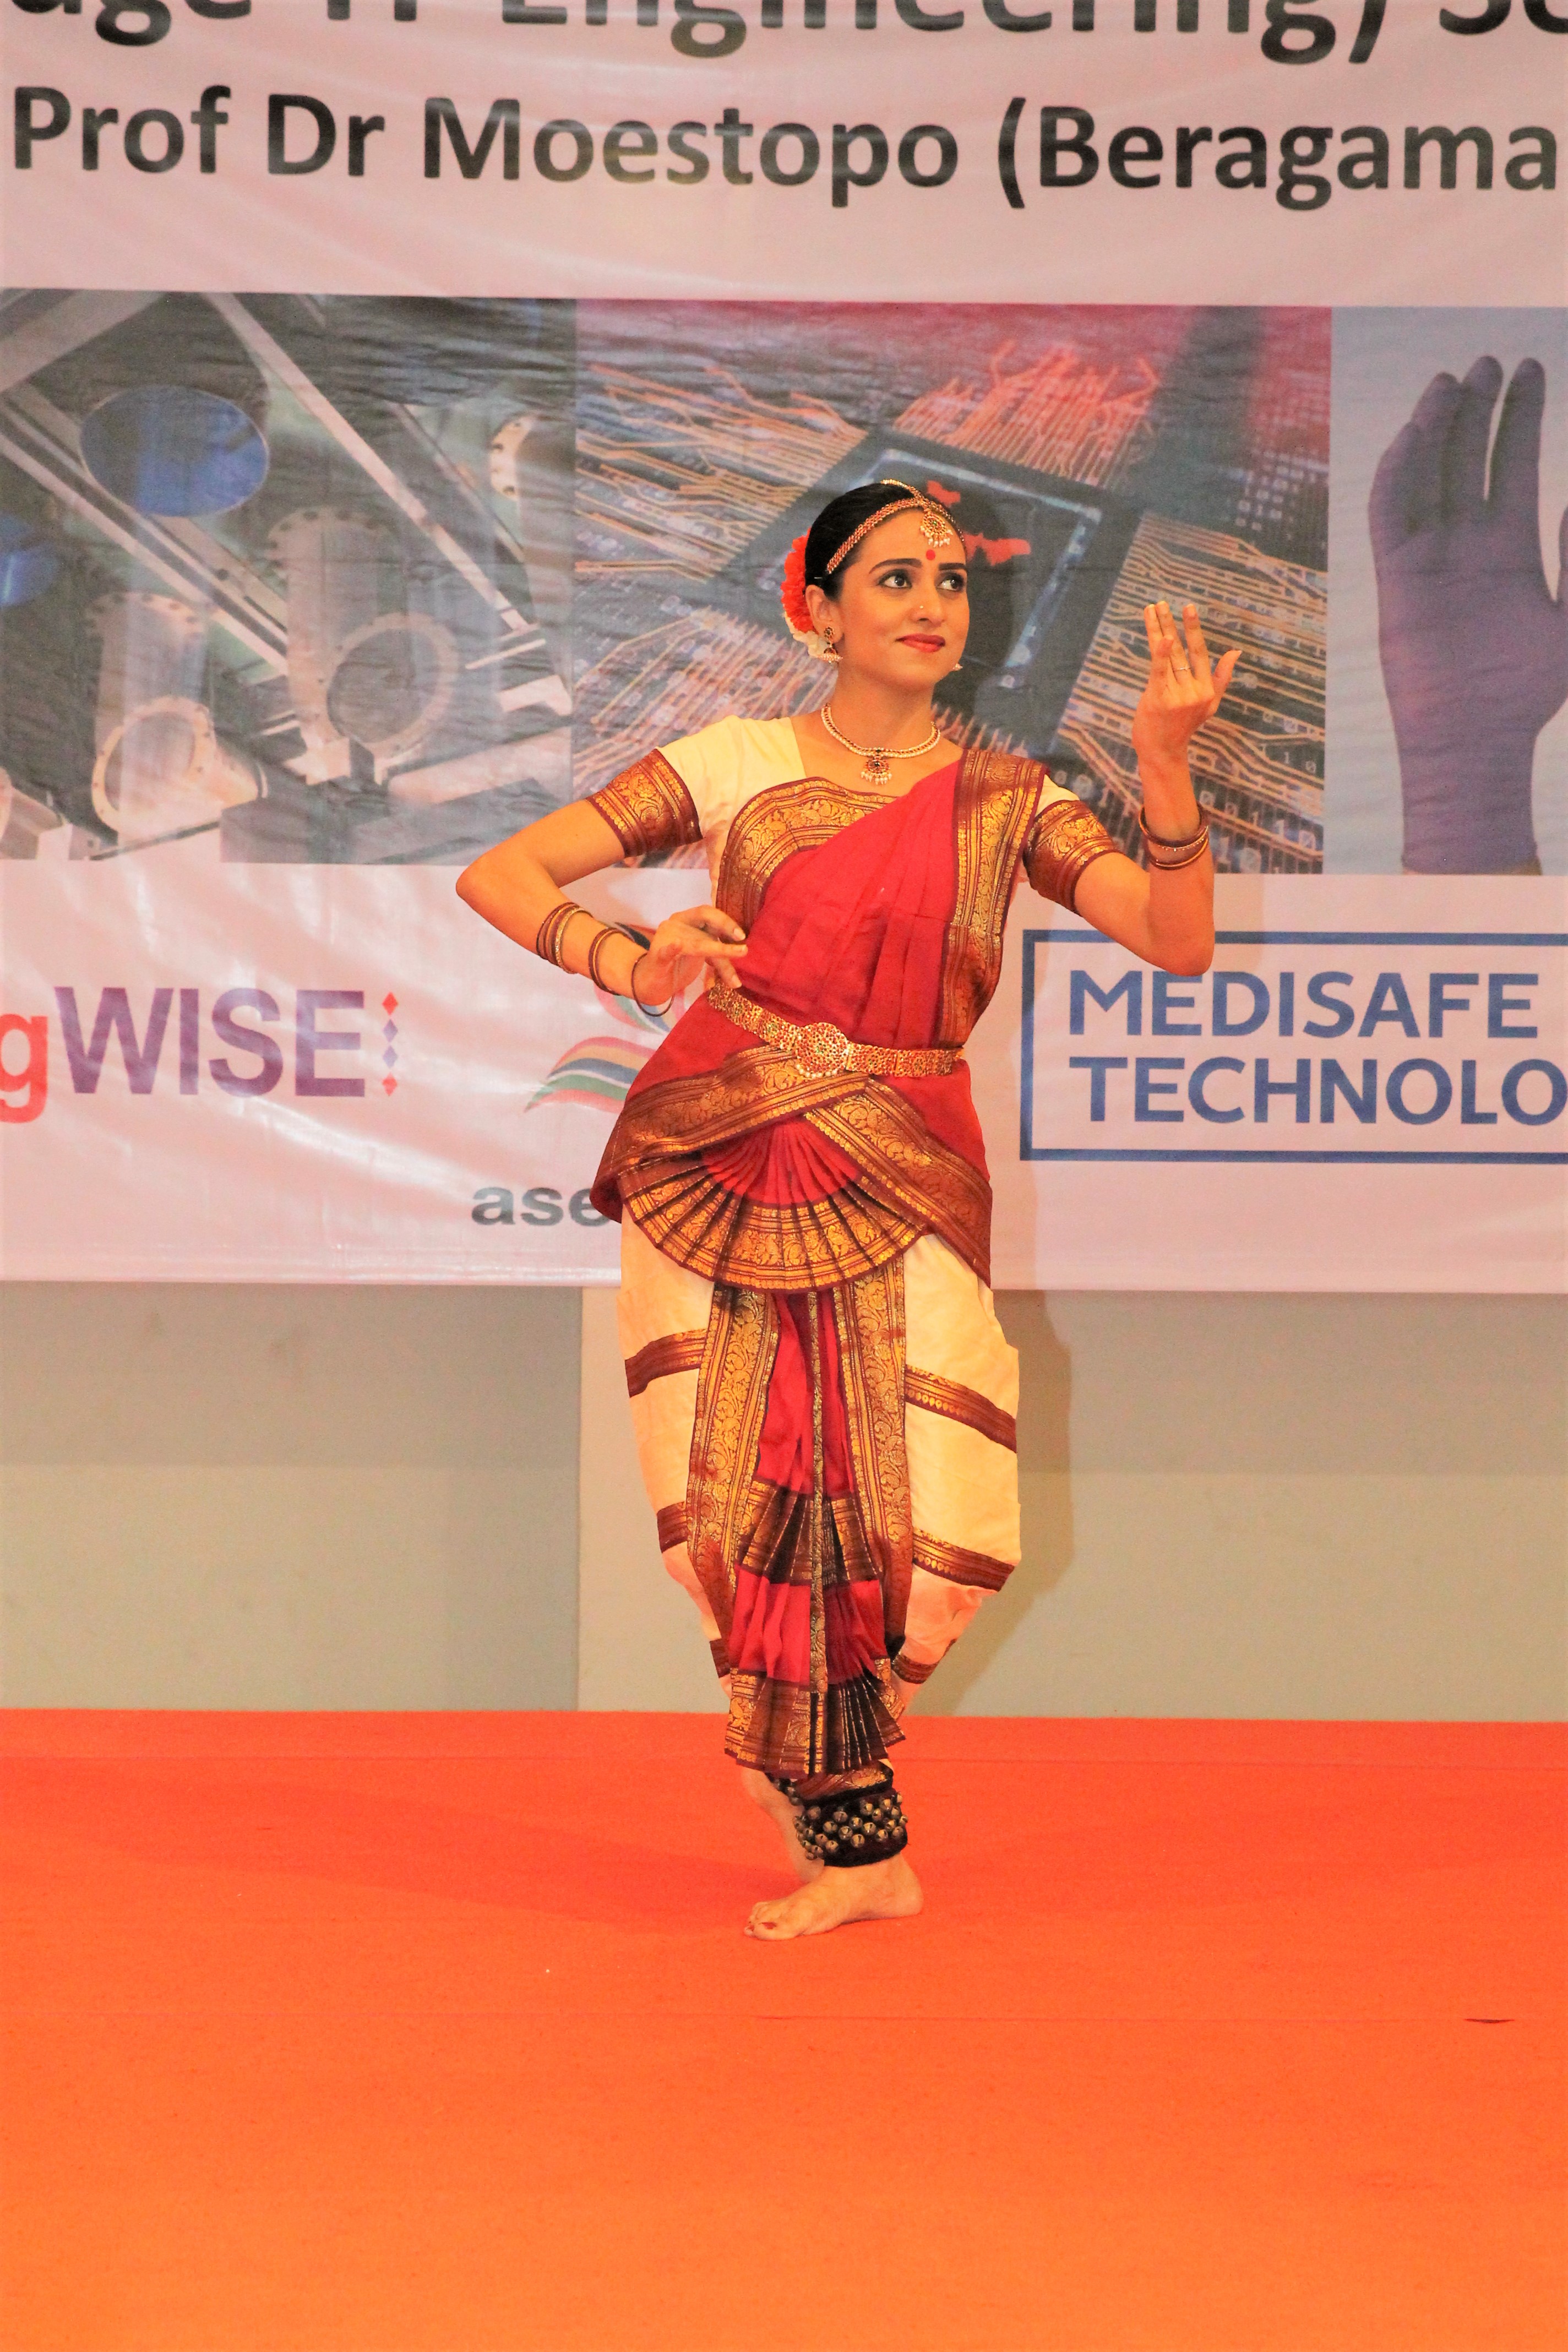 Best of India KNITE included a classical dance performed by Ms Archita